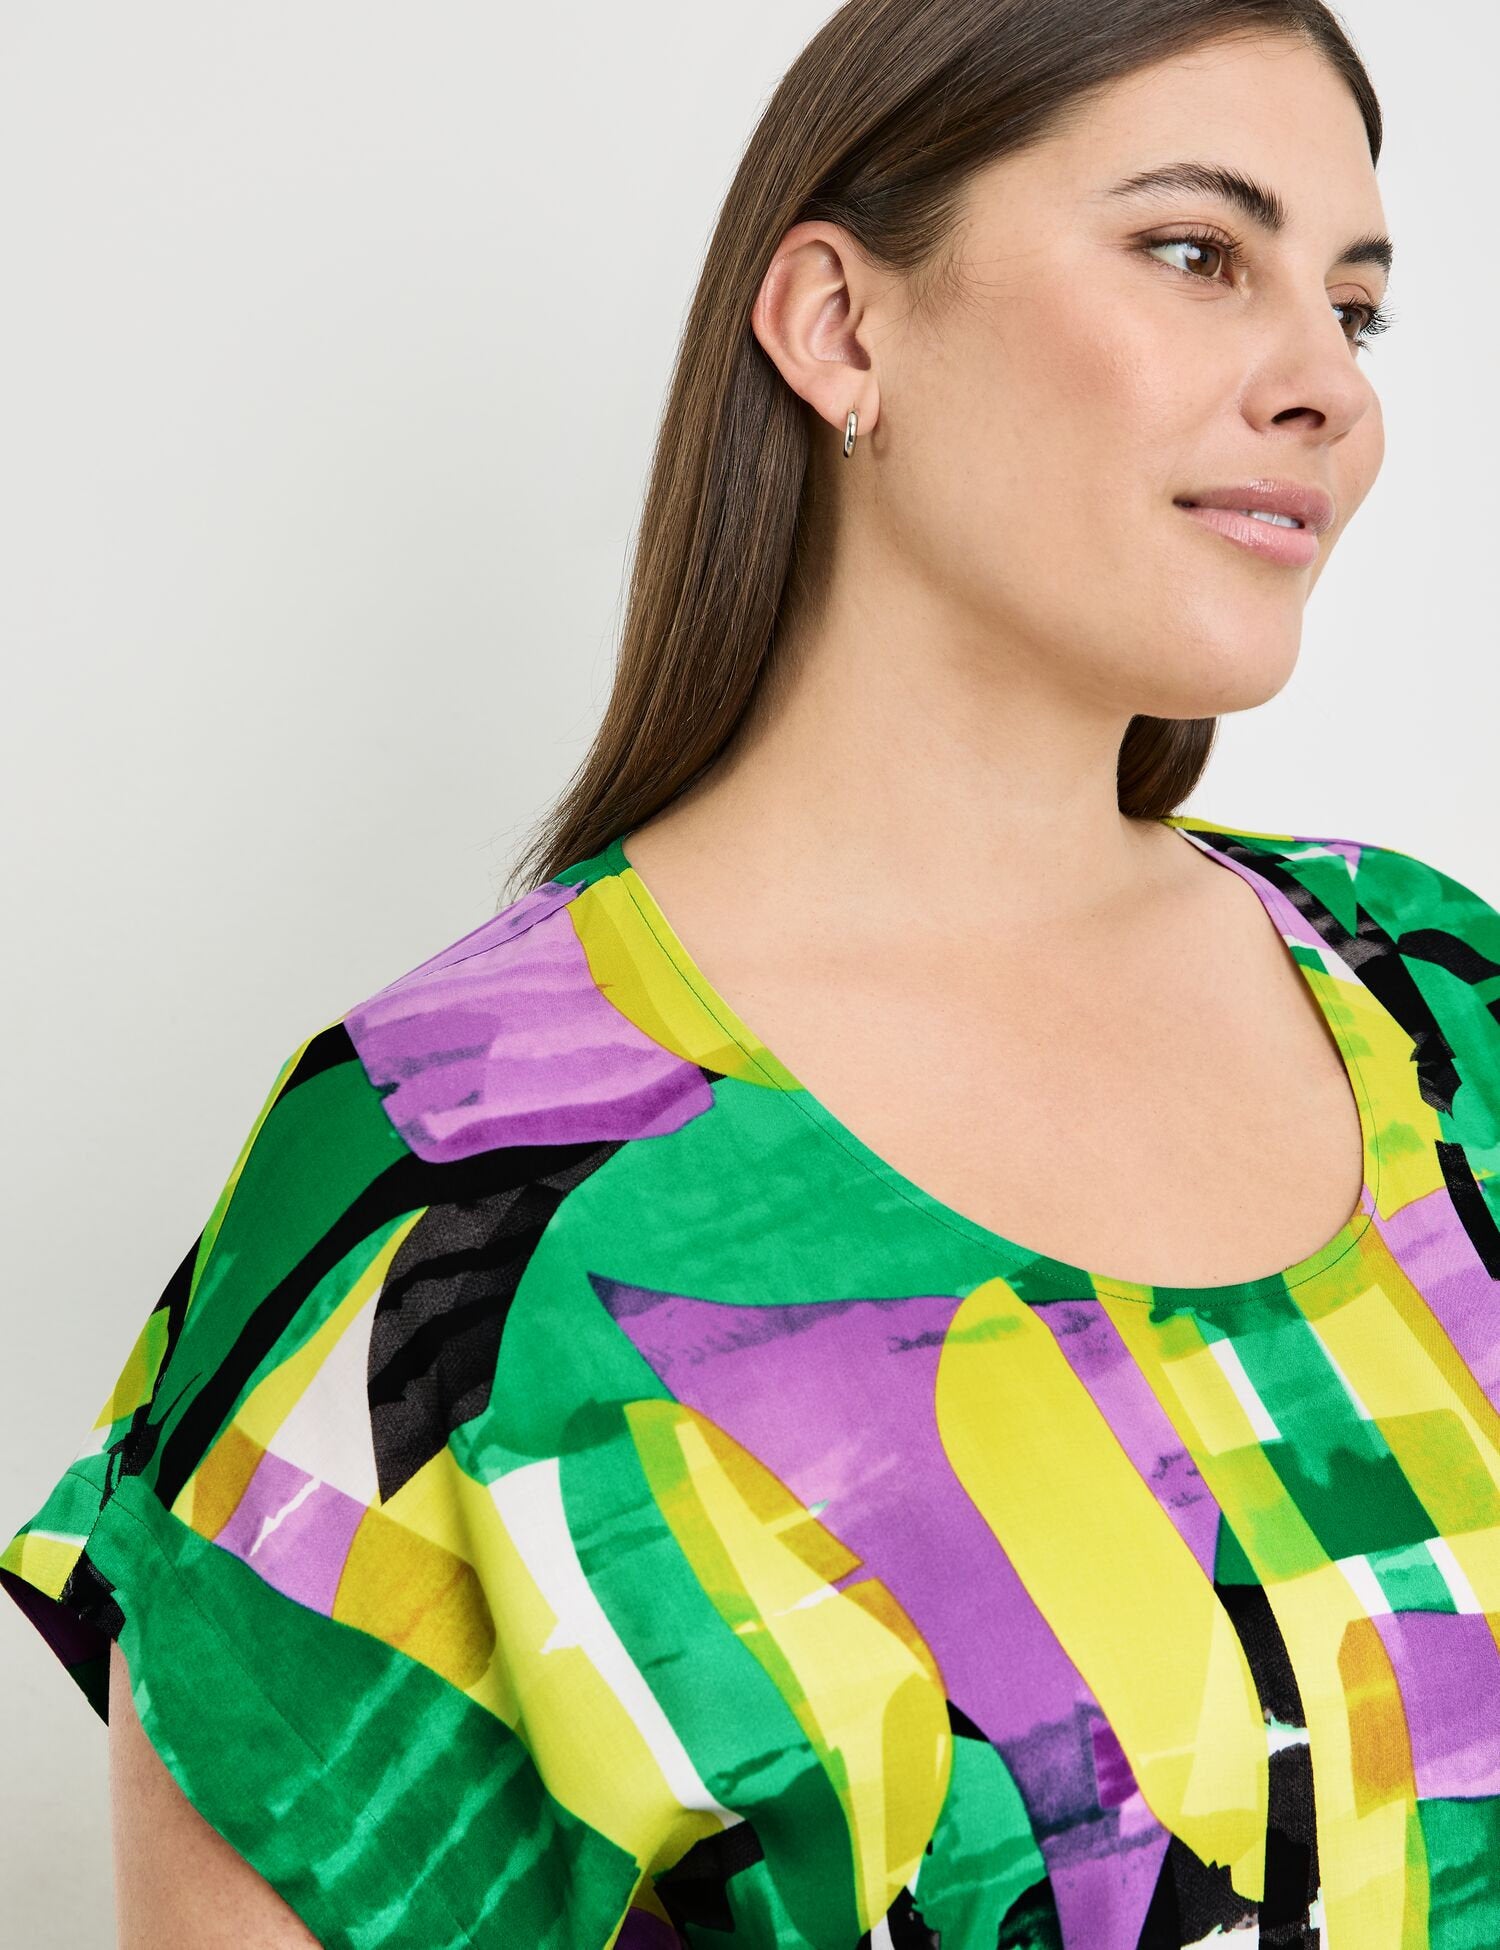 Blouse Top With A Colourful Print_460047-21064_5602_02